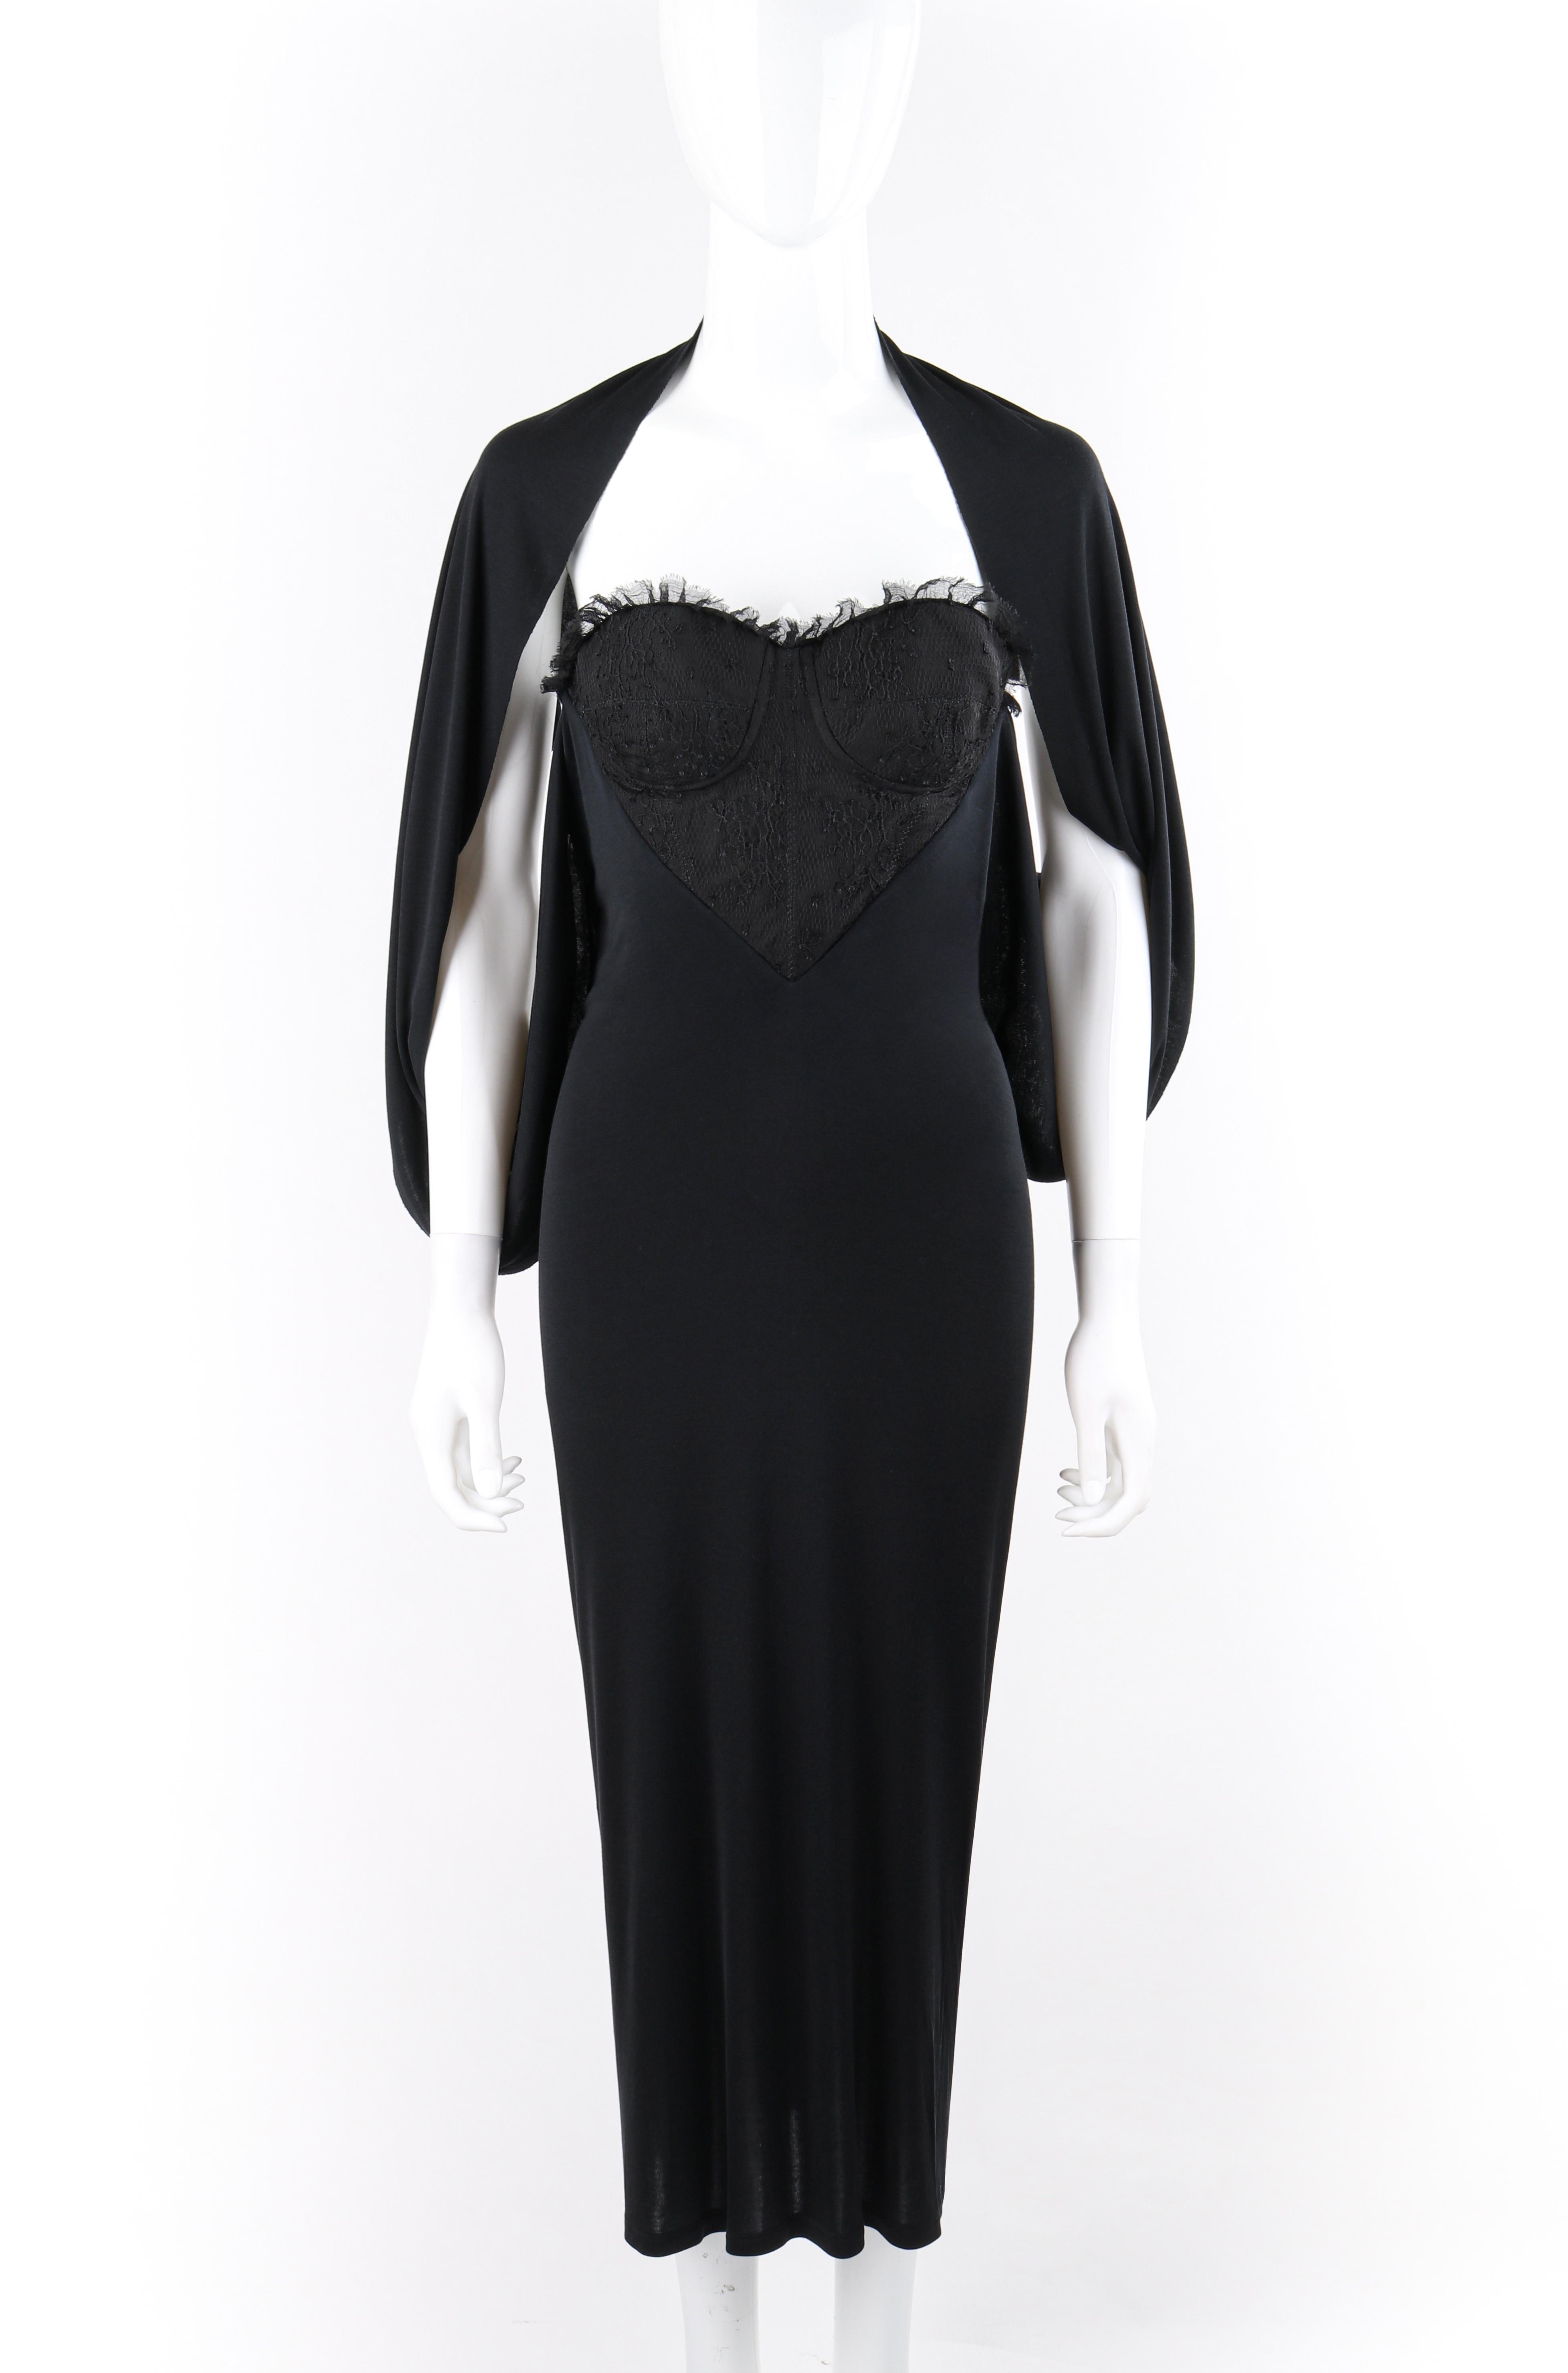 ALEXANDER McQUEEN S/S 2004 Black Multiway Bustier Midi Length Evening Dress  In Good Condition For Sale In Thiensville, WI